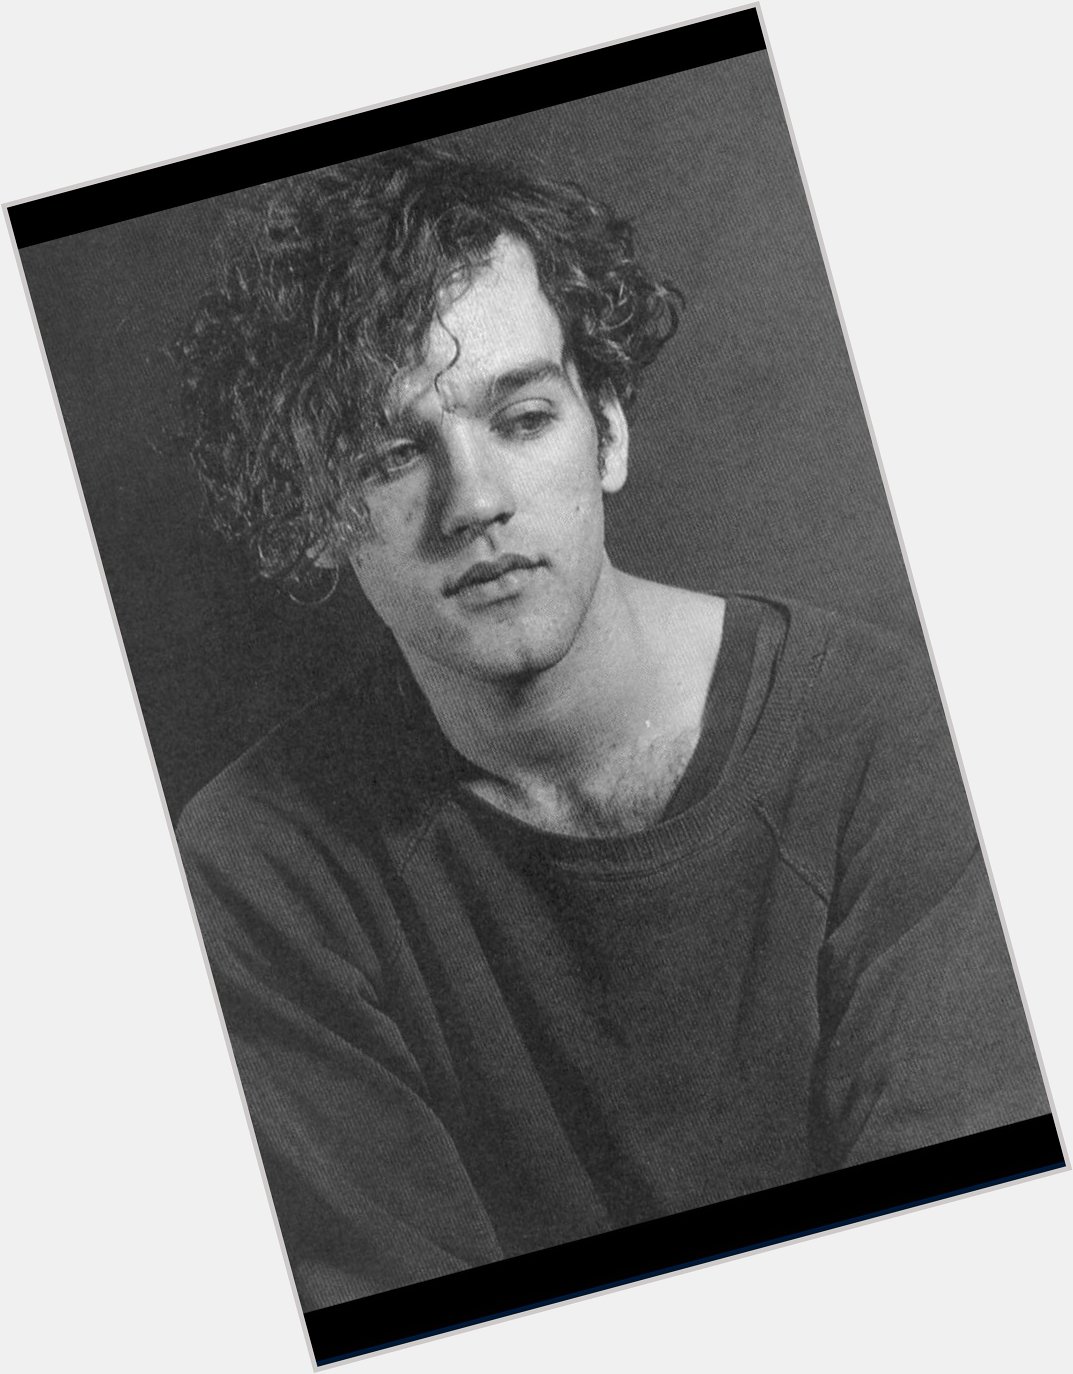 Happy Birthday, Michael Stipe! I liked you better before you started looking like a monkey. 